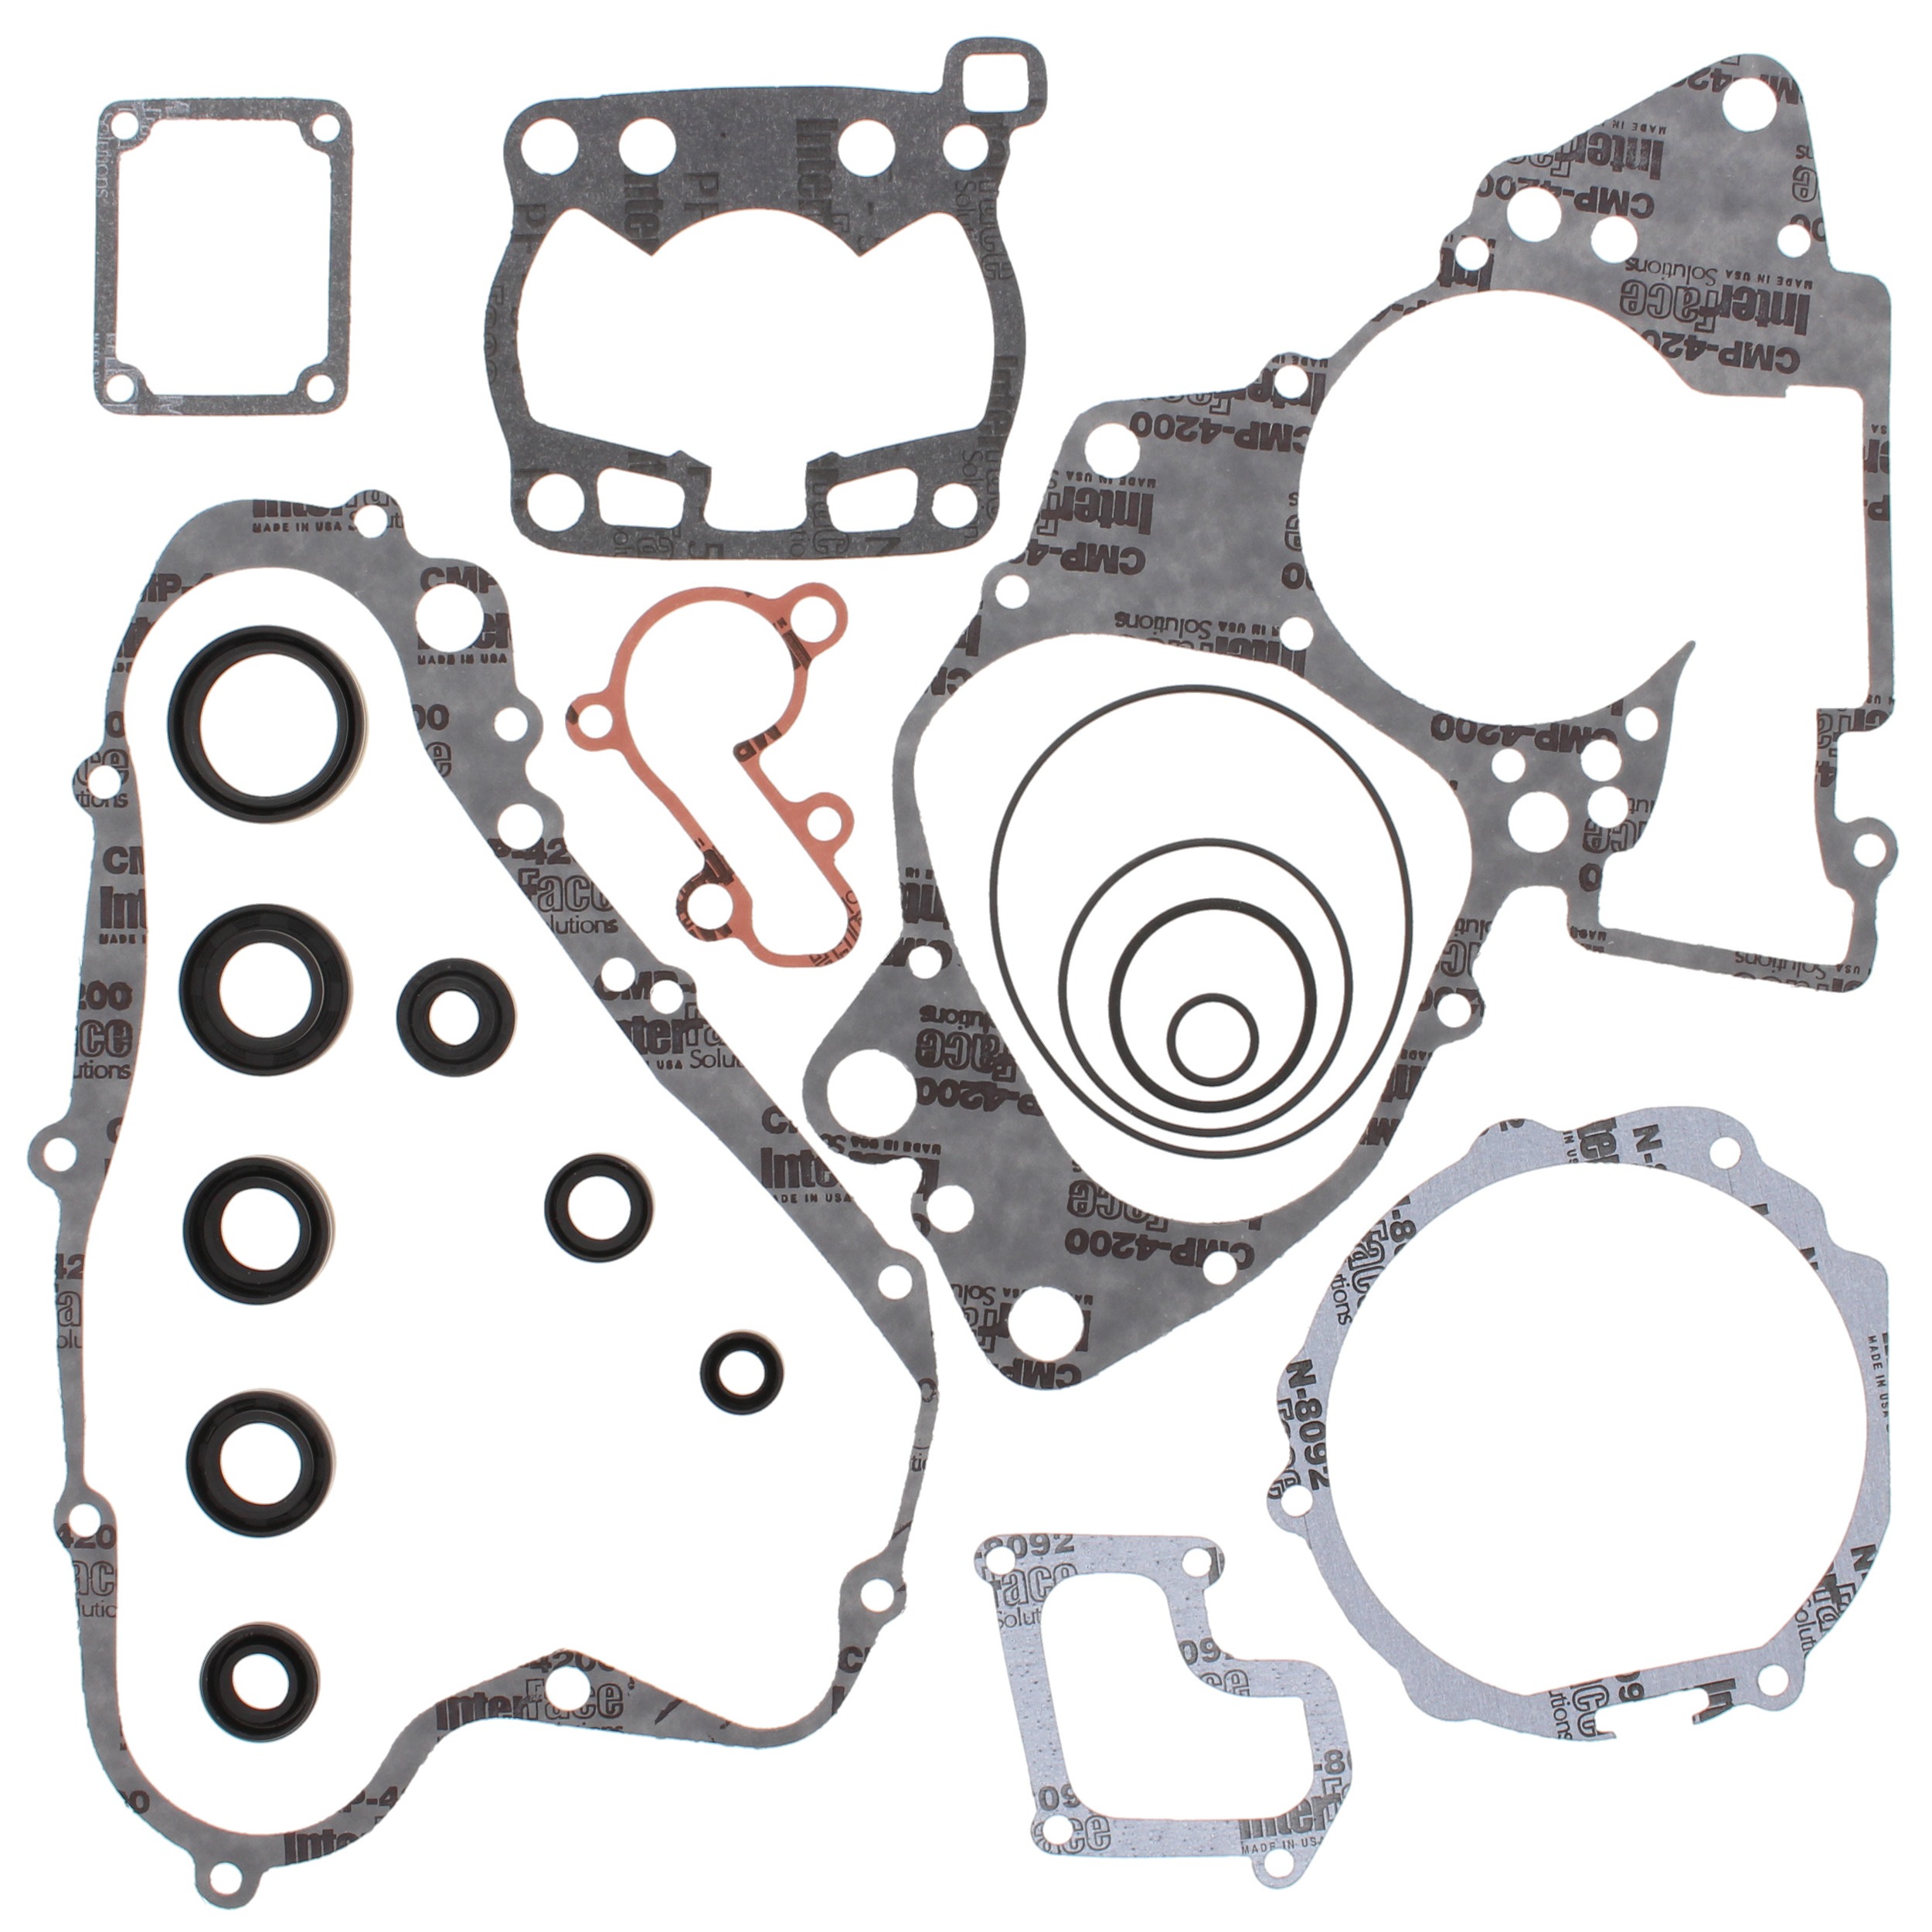 Complete Gasket Kit w/Oil Seal - For 91-01 Suzuki RM80 - Click Image to Close